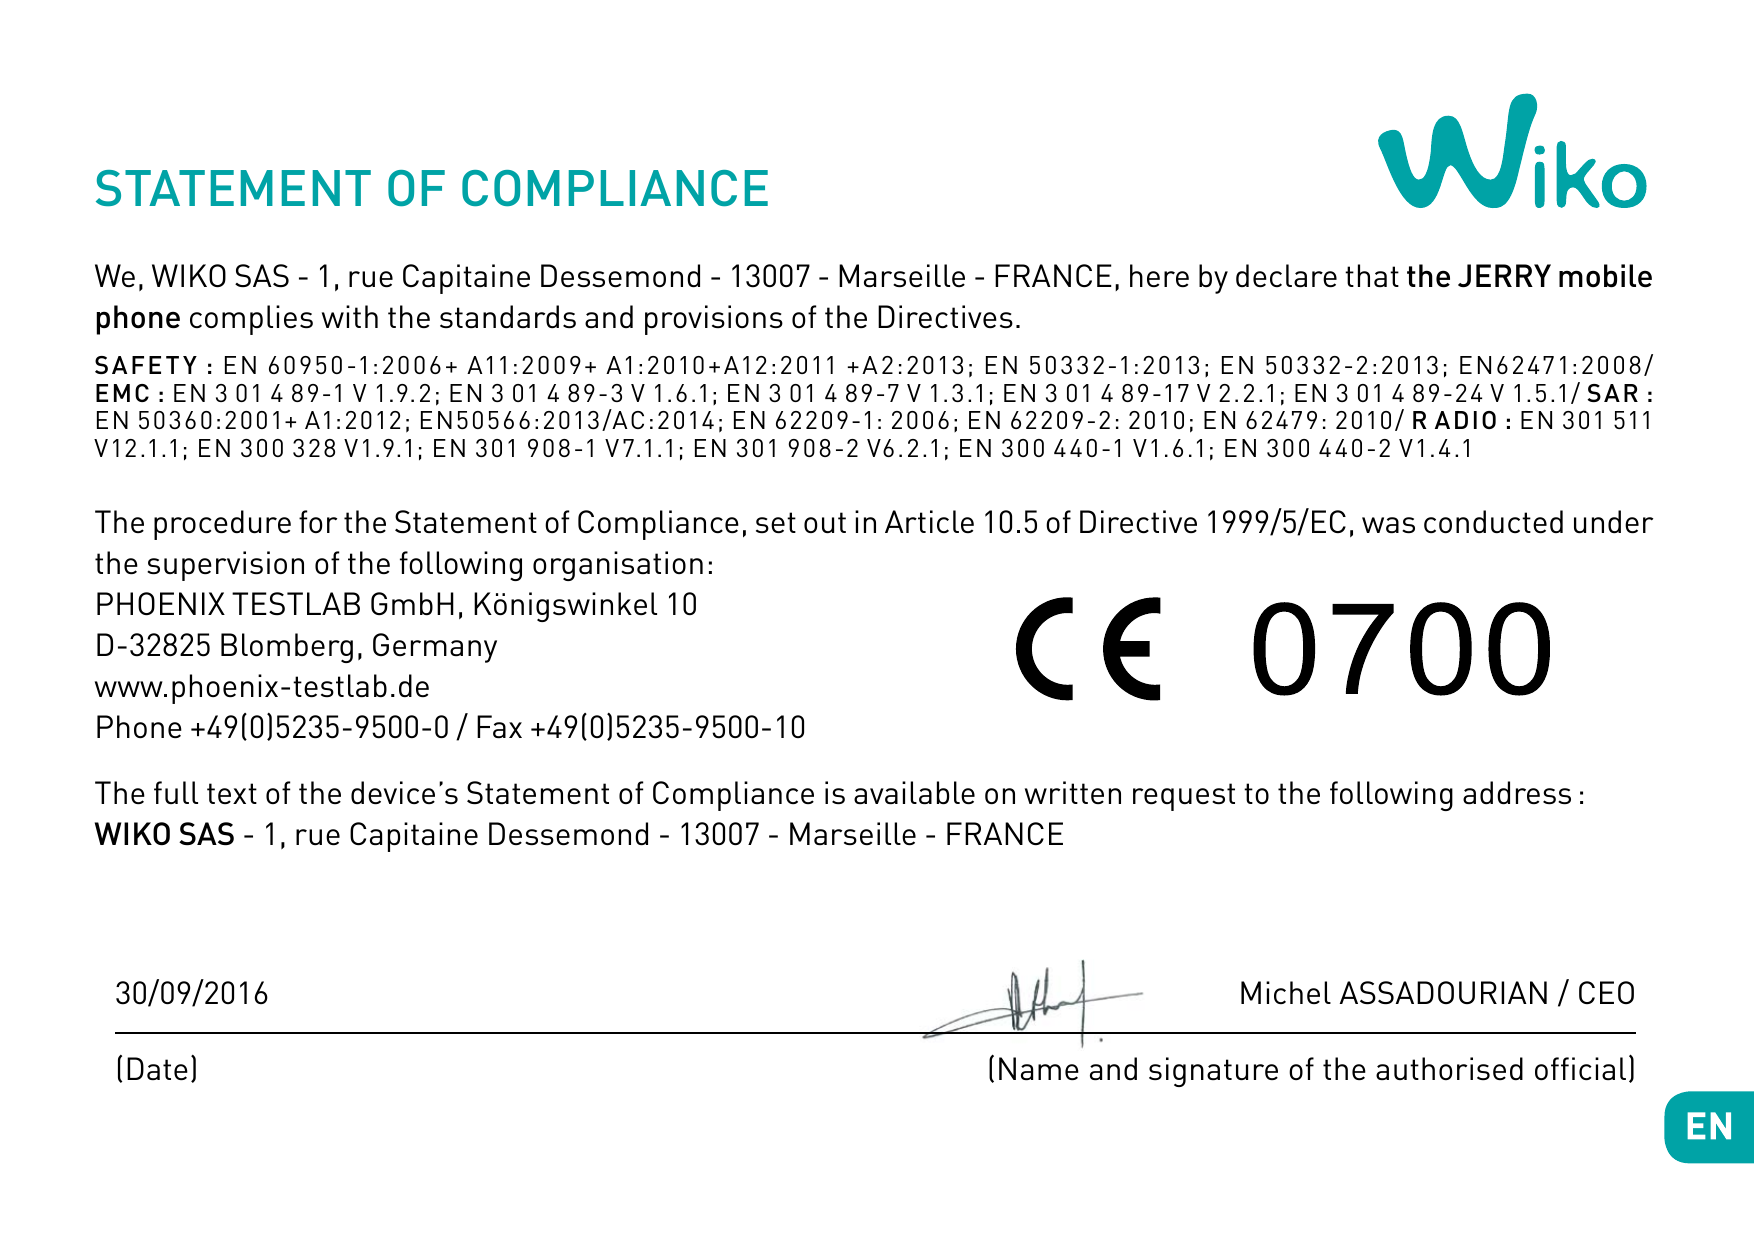 STATEMENT OF COMPLIANCEWe, WIKO SAS - 1, rue Capitaine Dessemond - 13007 - Marseille - FRANCE, here by declare that the JERRY mo